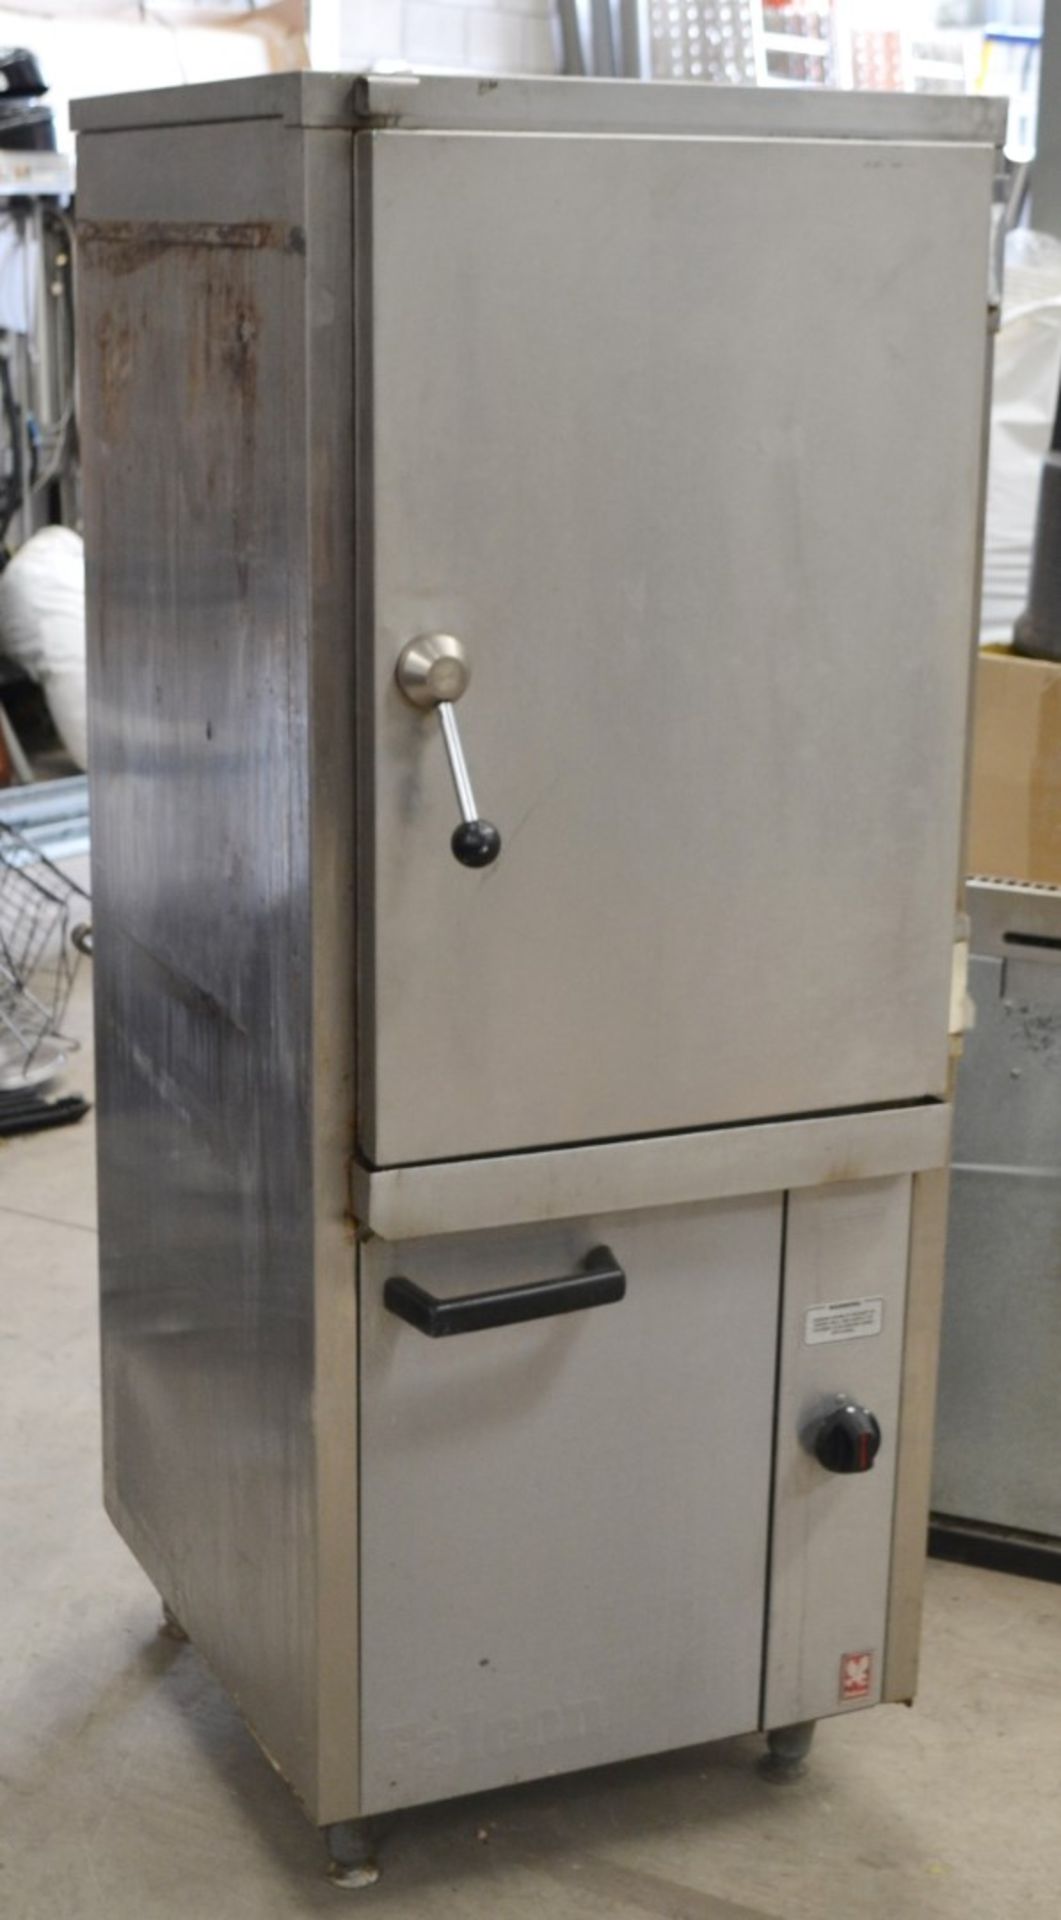 1 x Falcon Commercial Kitchen Steamer Oven - Natural Gas - Model G6478 - CL435 - Location: